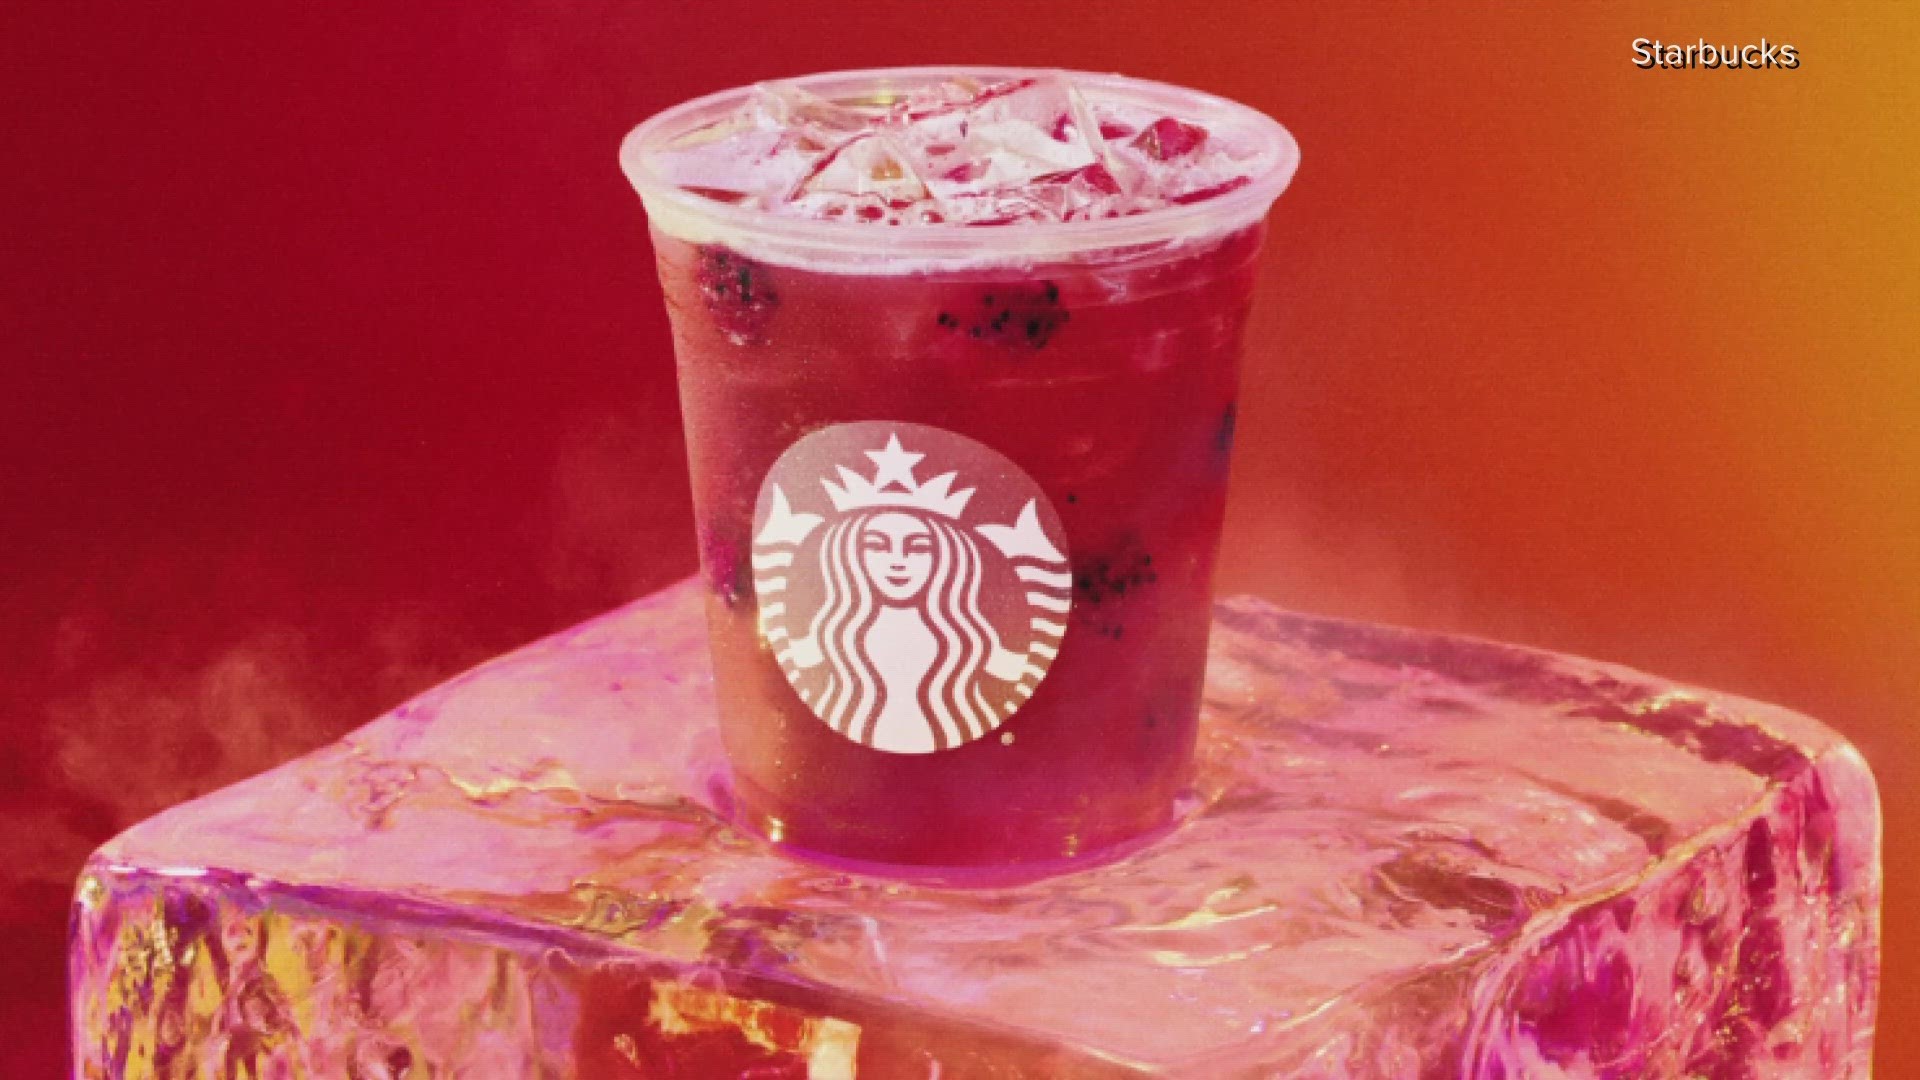 The new spicy lemonade drinks and cold foam will be available in U.S. Starbucks stores for a very limited time this spring, while supplies last.